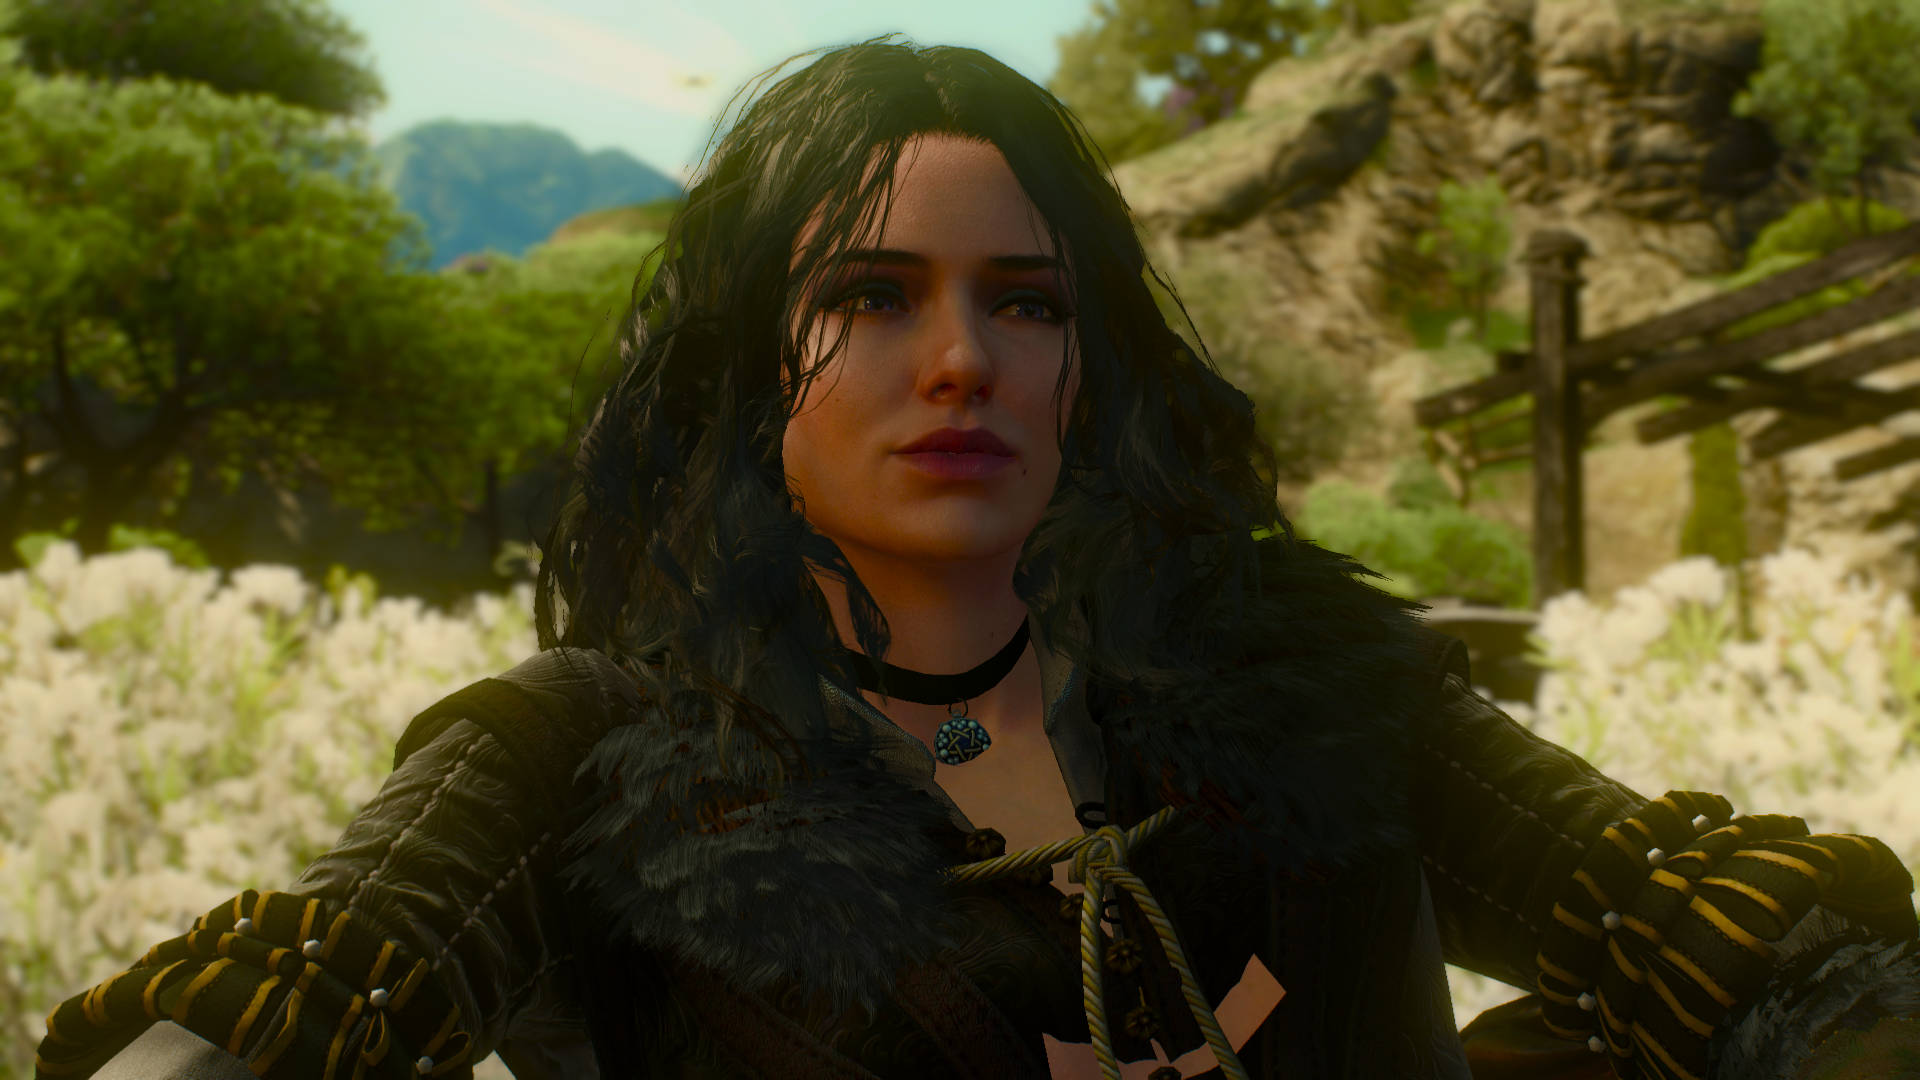 The Witcher 3 Wild Hunt Video Games Yennefer The Witcher Yennefer Of Vengerberg The Witcher 3 Wild H 1920x1080